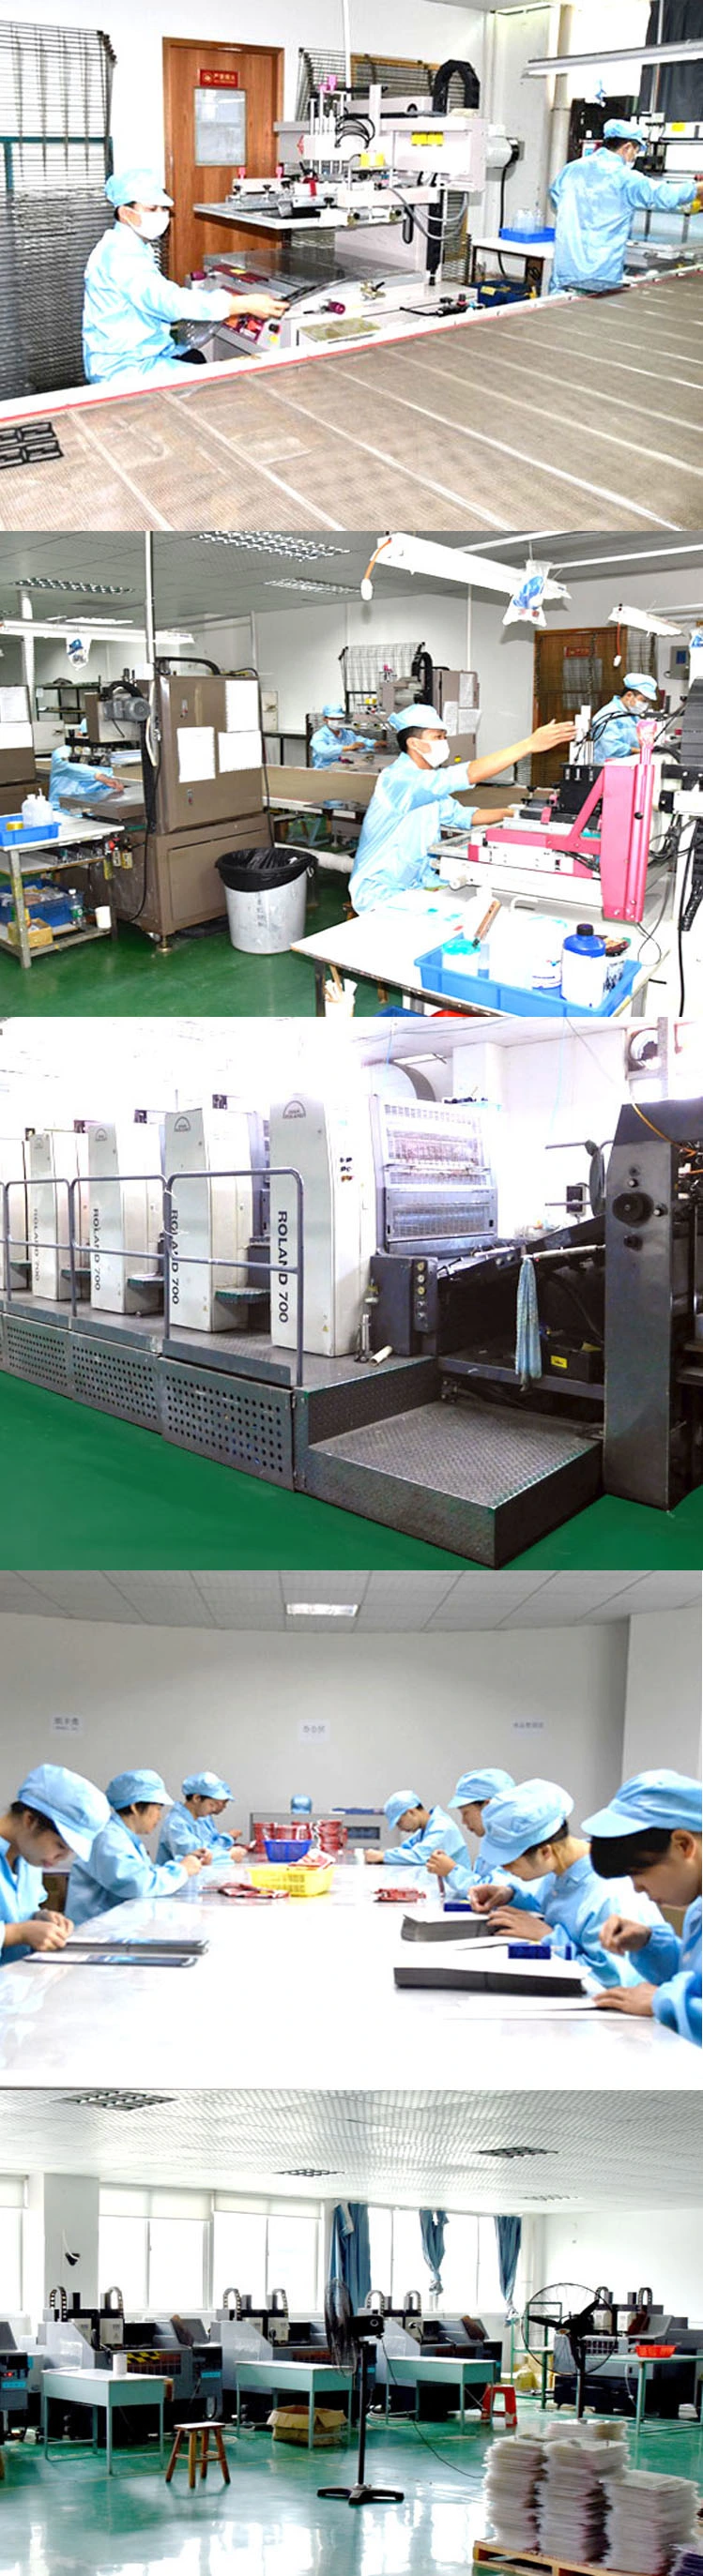 Flexible Printed Circuit Board Manufacturer in China